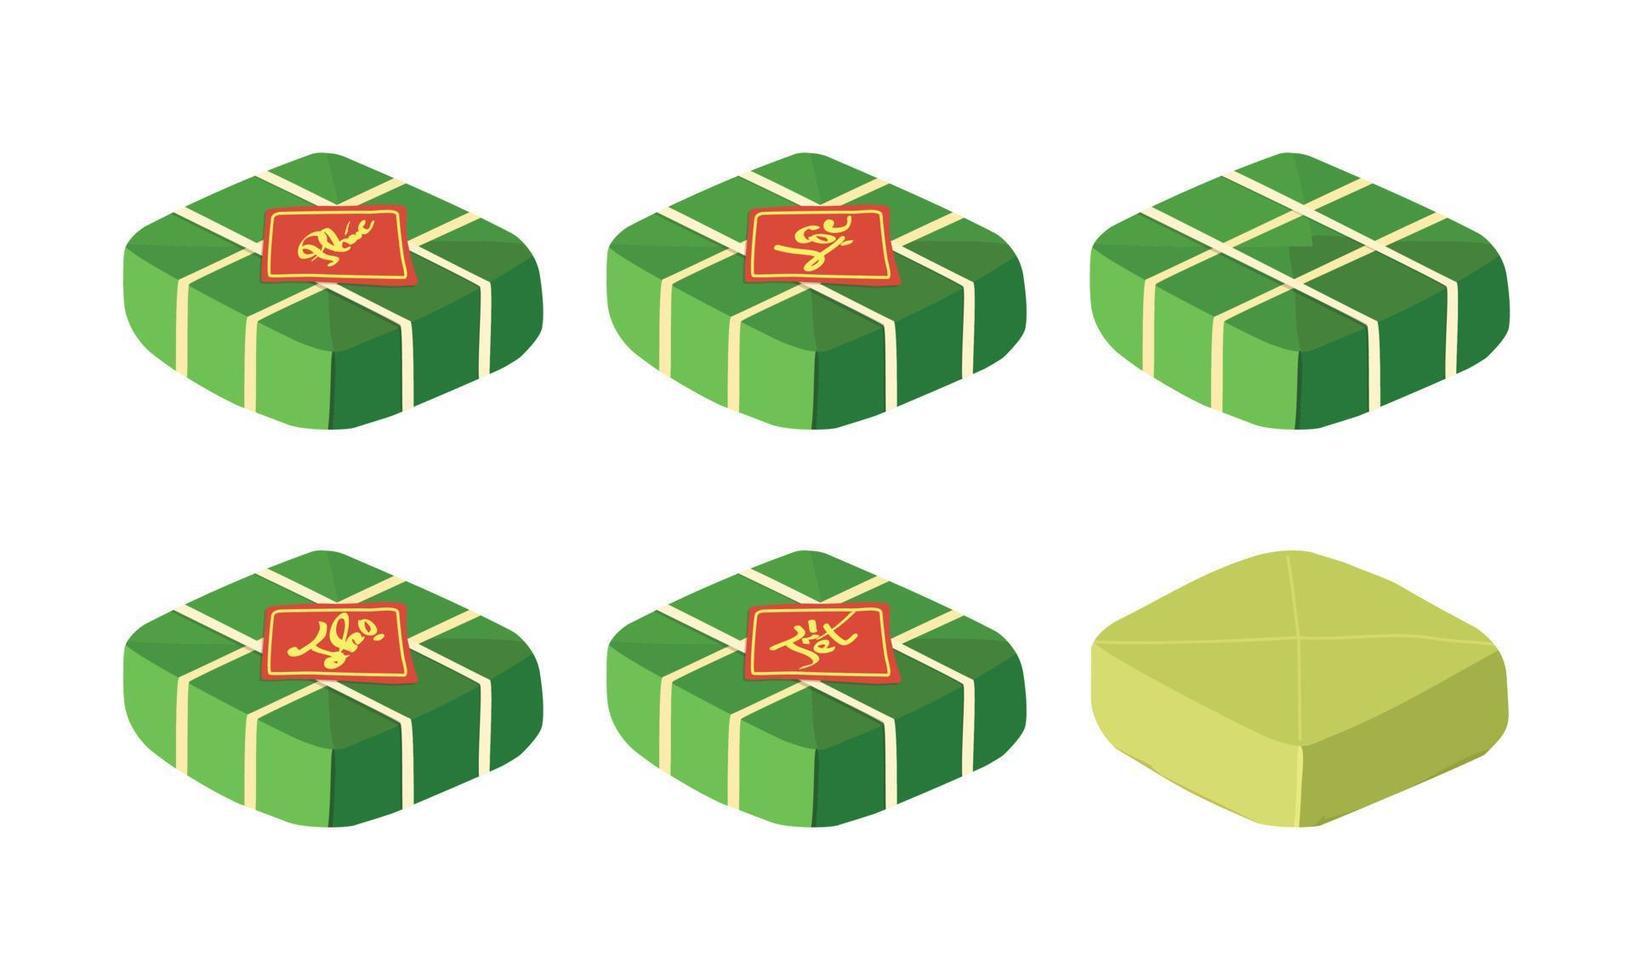 Vietnamese Banh Chung vector set. Banh Chung wrapped in green leaf with the red labels mean happiness, wealth and longevity. Asian food. Vietnamese cuisine. Vietnamese Lunar New Year traditional food